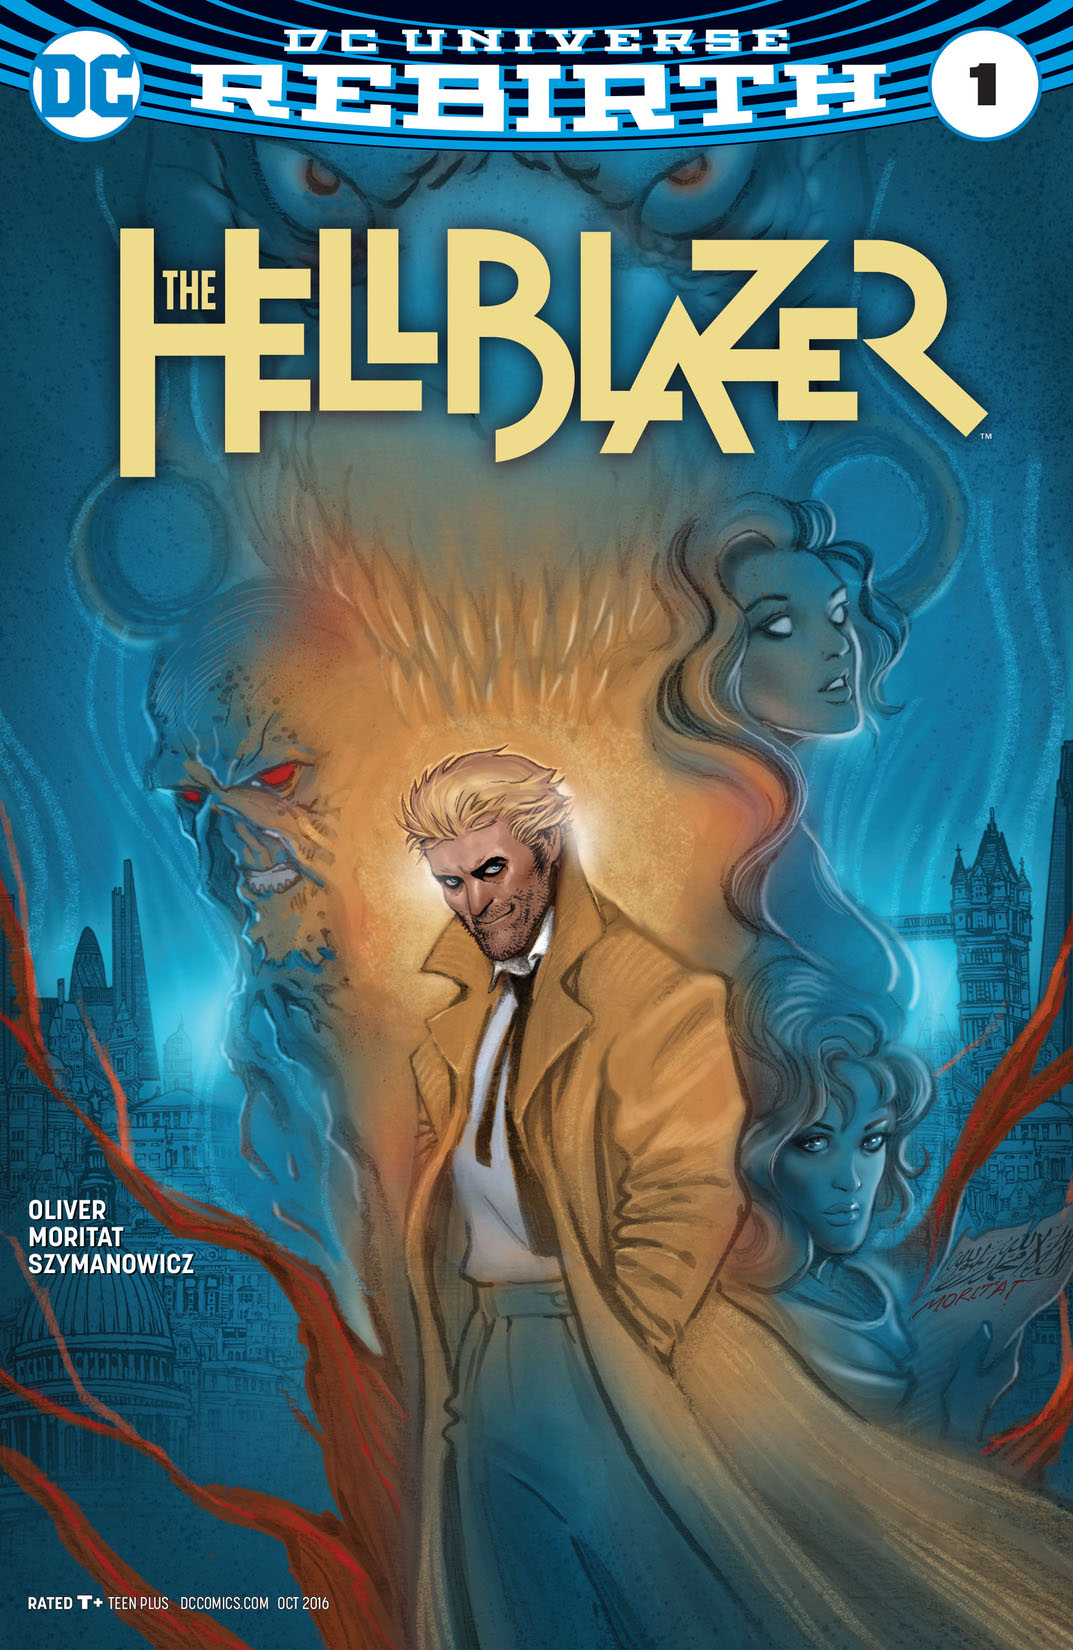 The Hellblazer #1 preview images